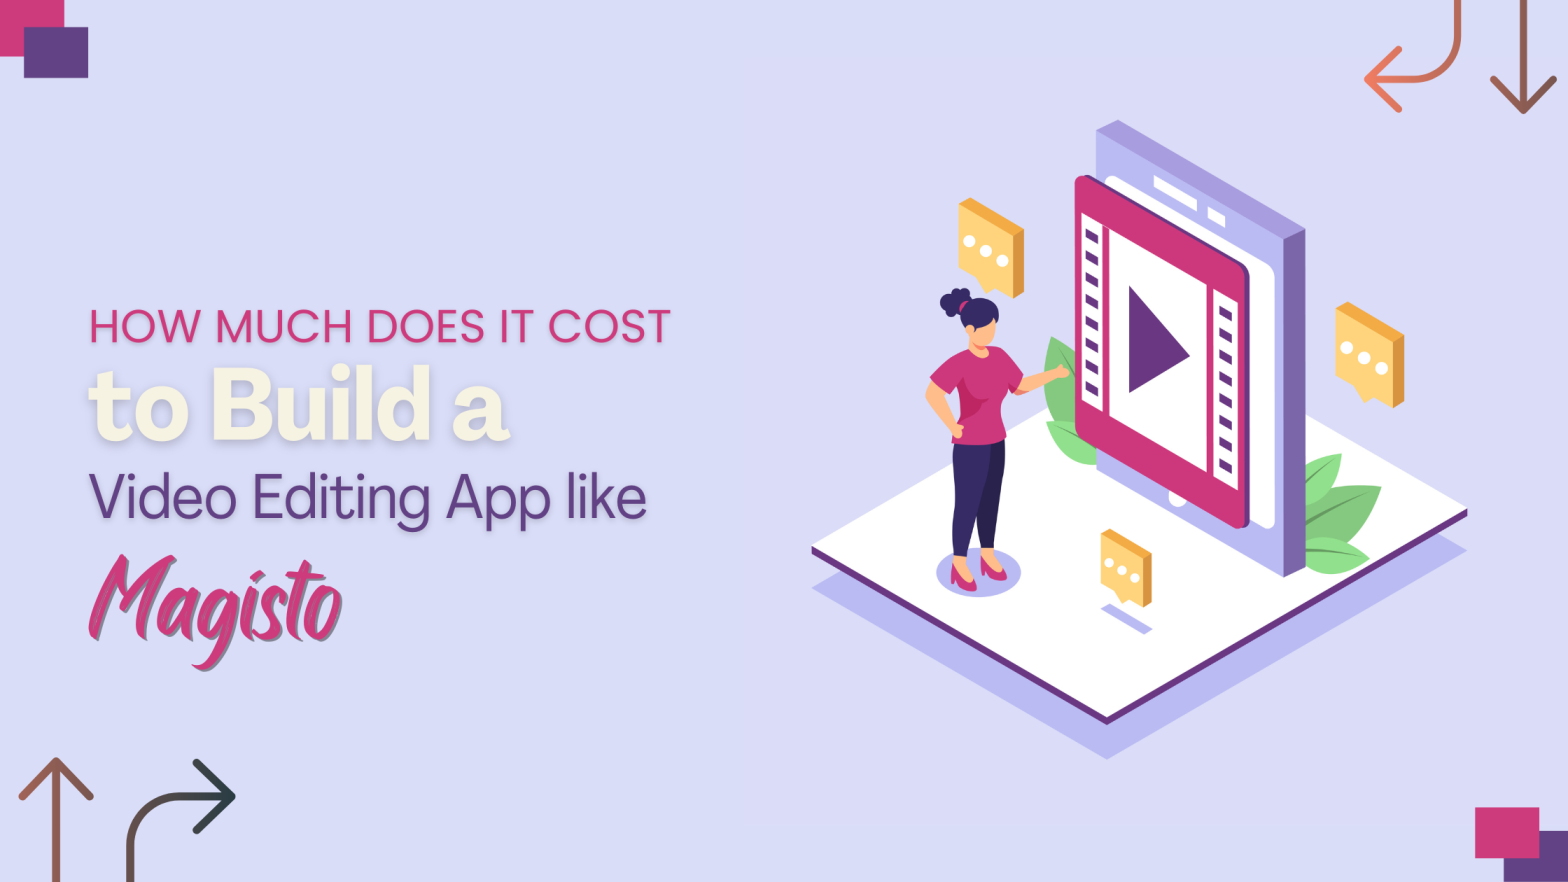 Cost to Build a Video Editing App like Magisto